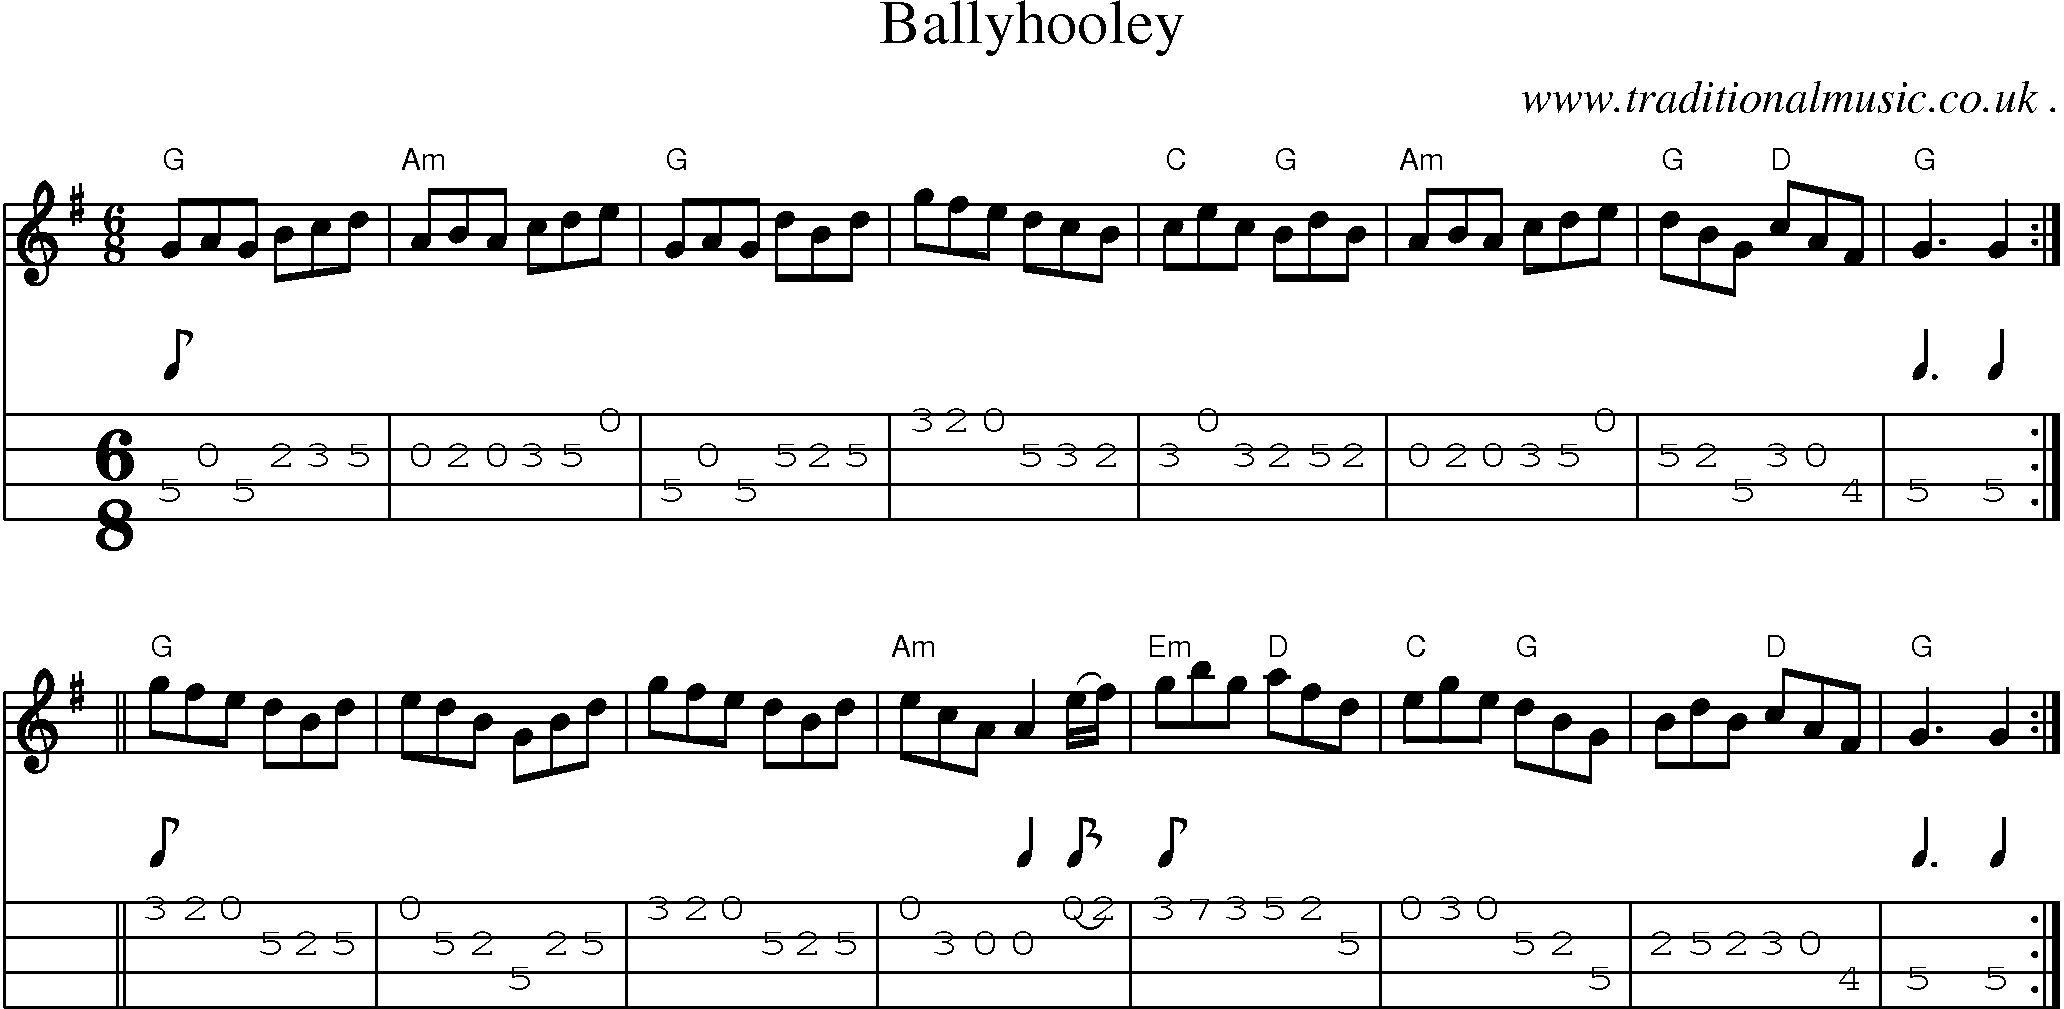 Music Score and Guitar Tabs for Ballyhooley